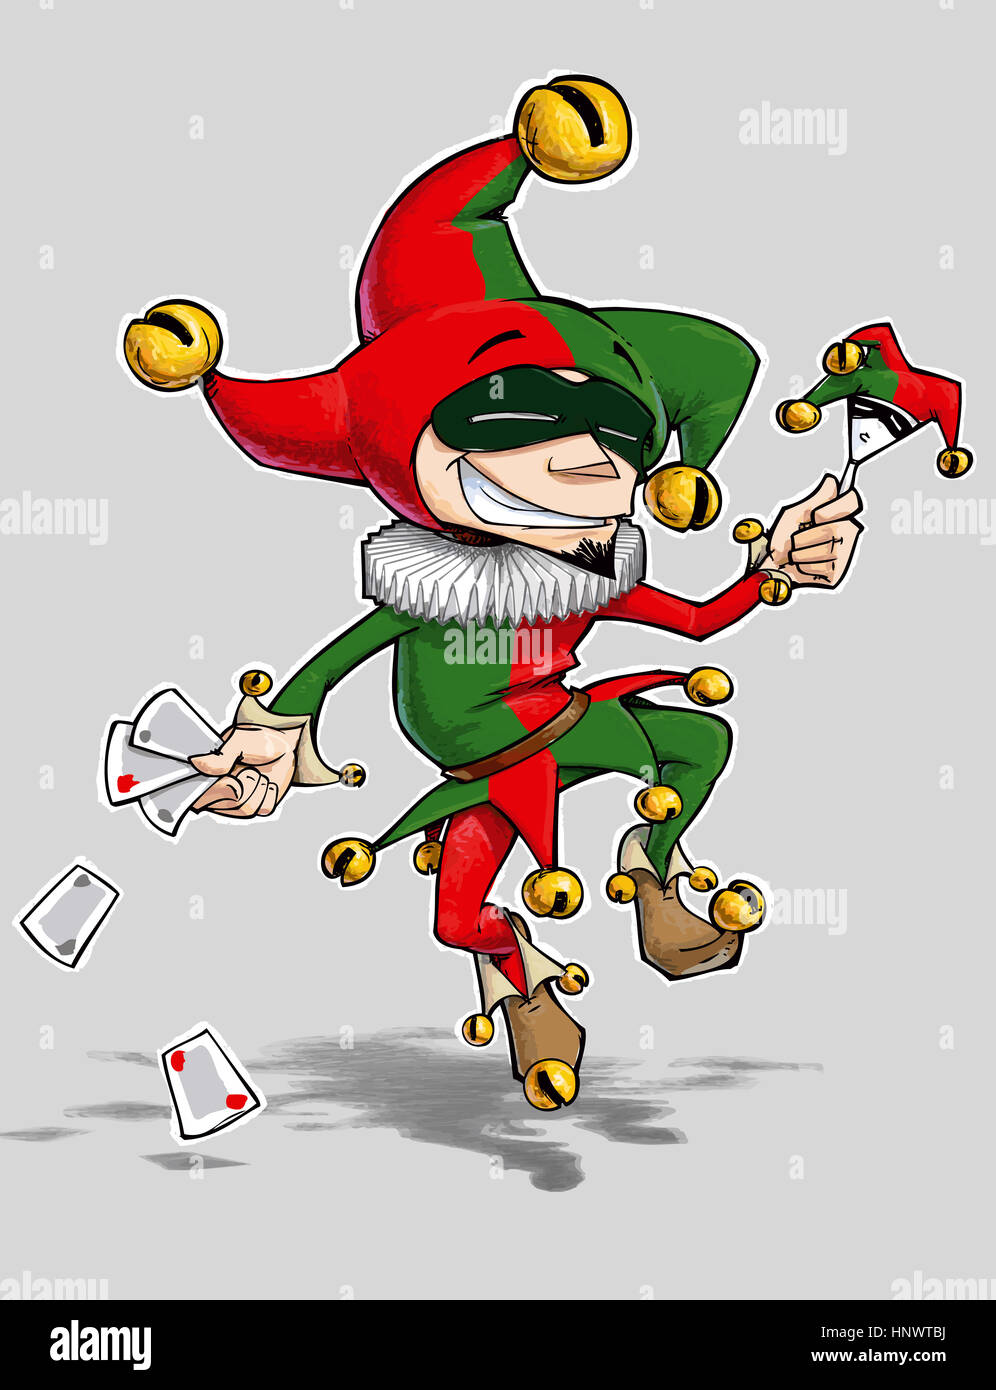 Cartoon illustration of a dancing jester in green and red outfit. Stock Photo